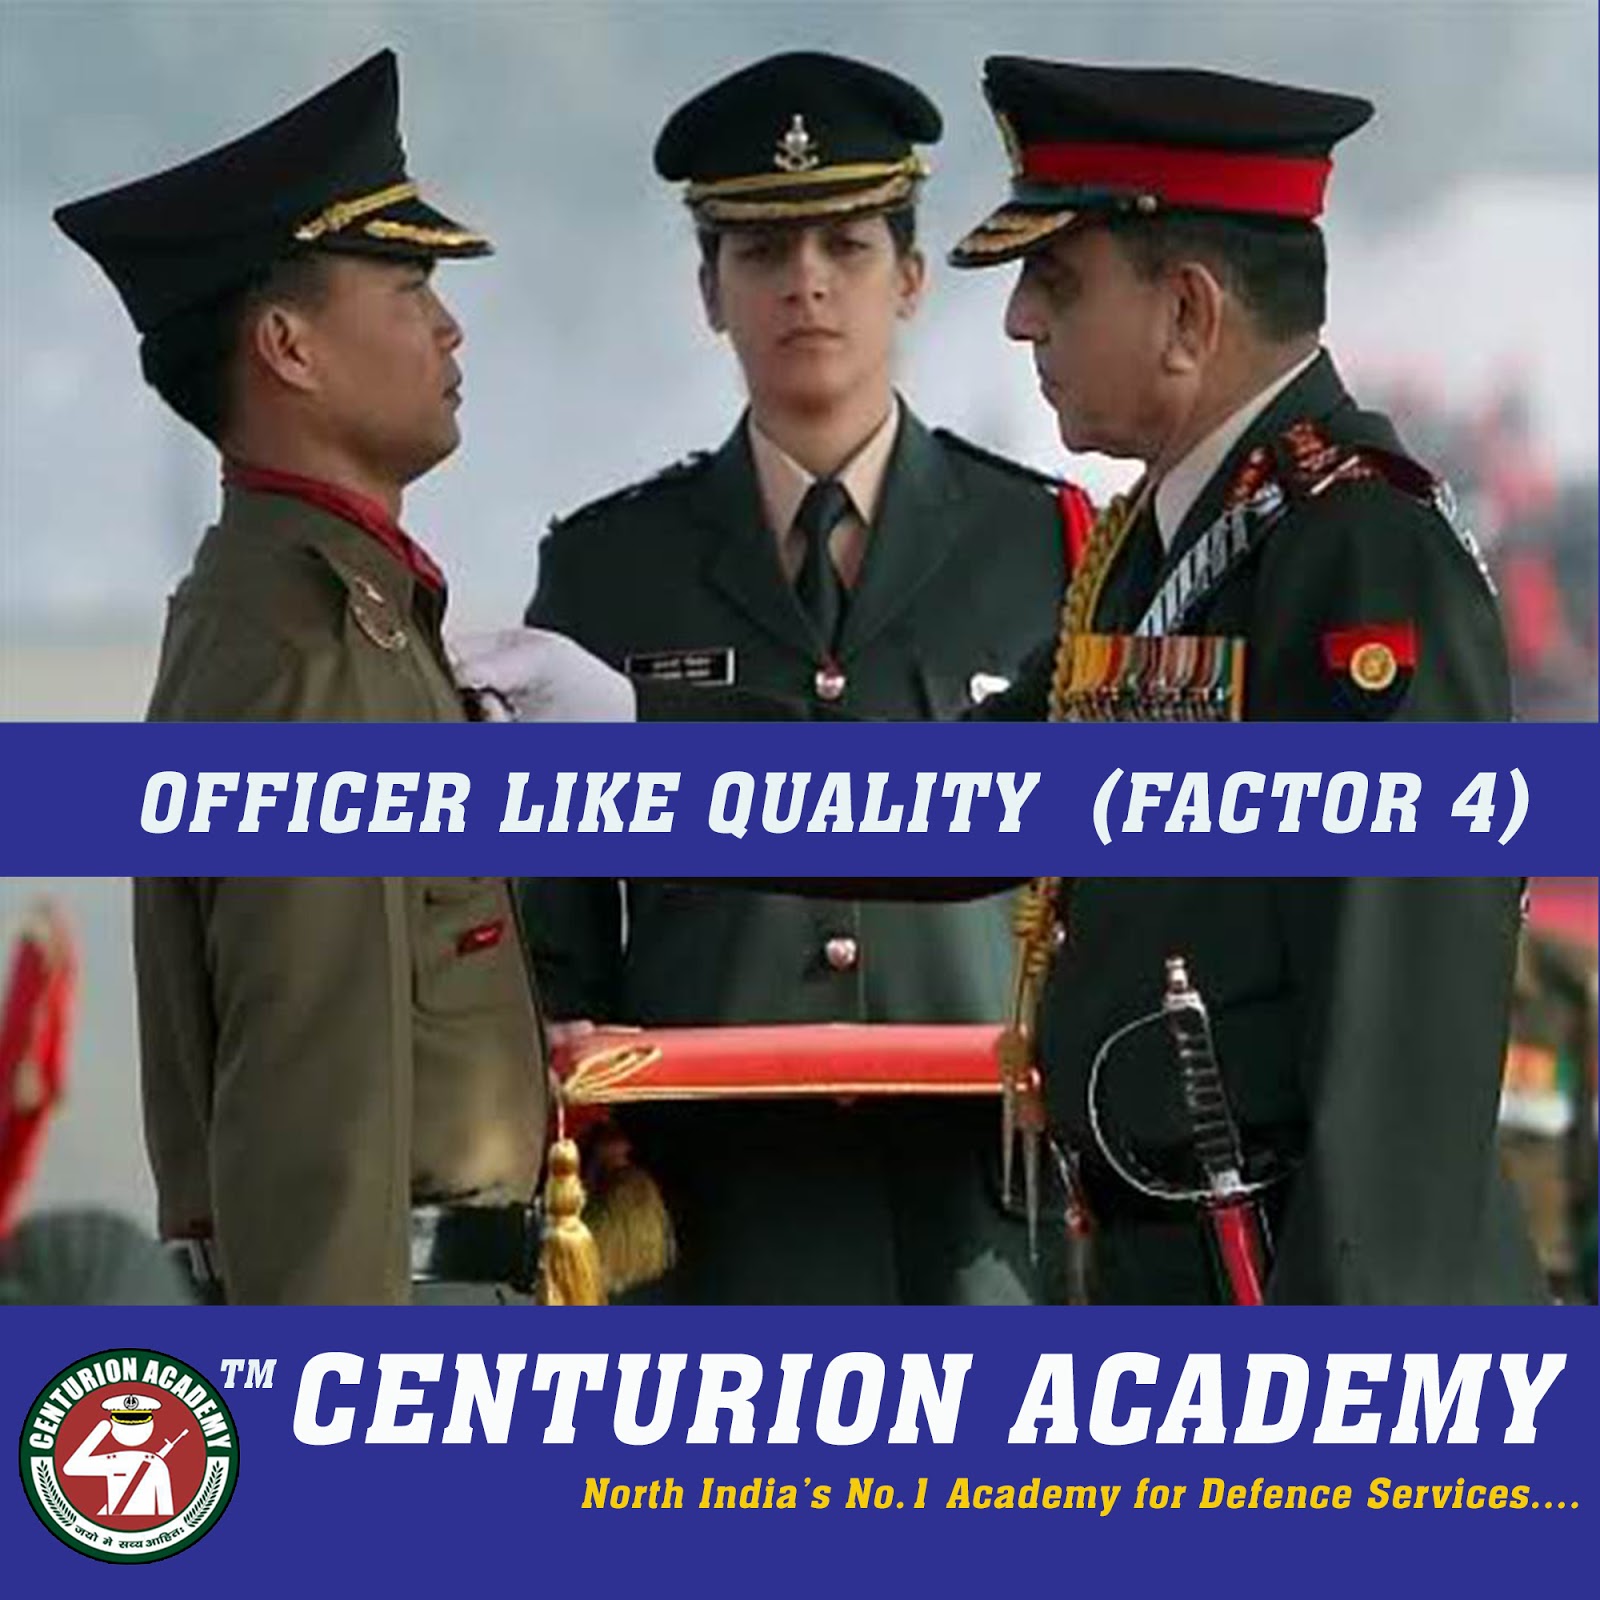 ALL ABOUT OFFICER LIKE QUALITIES-IV